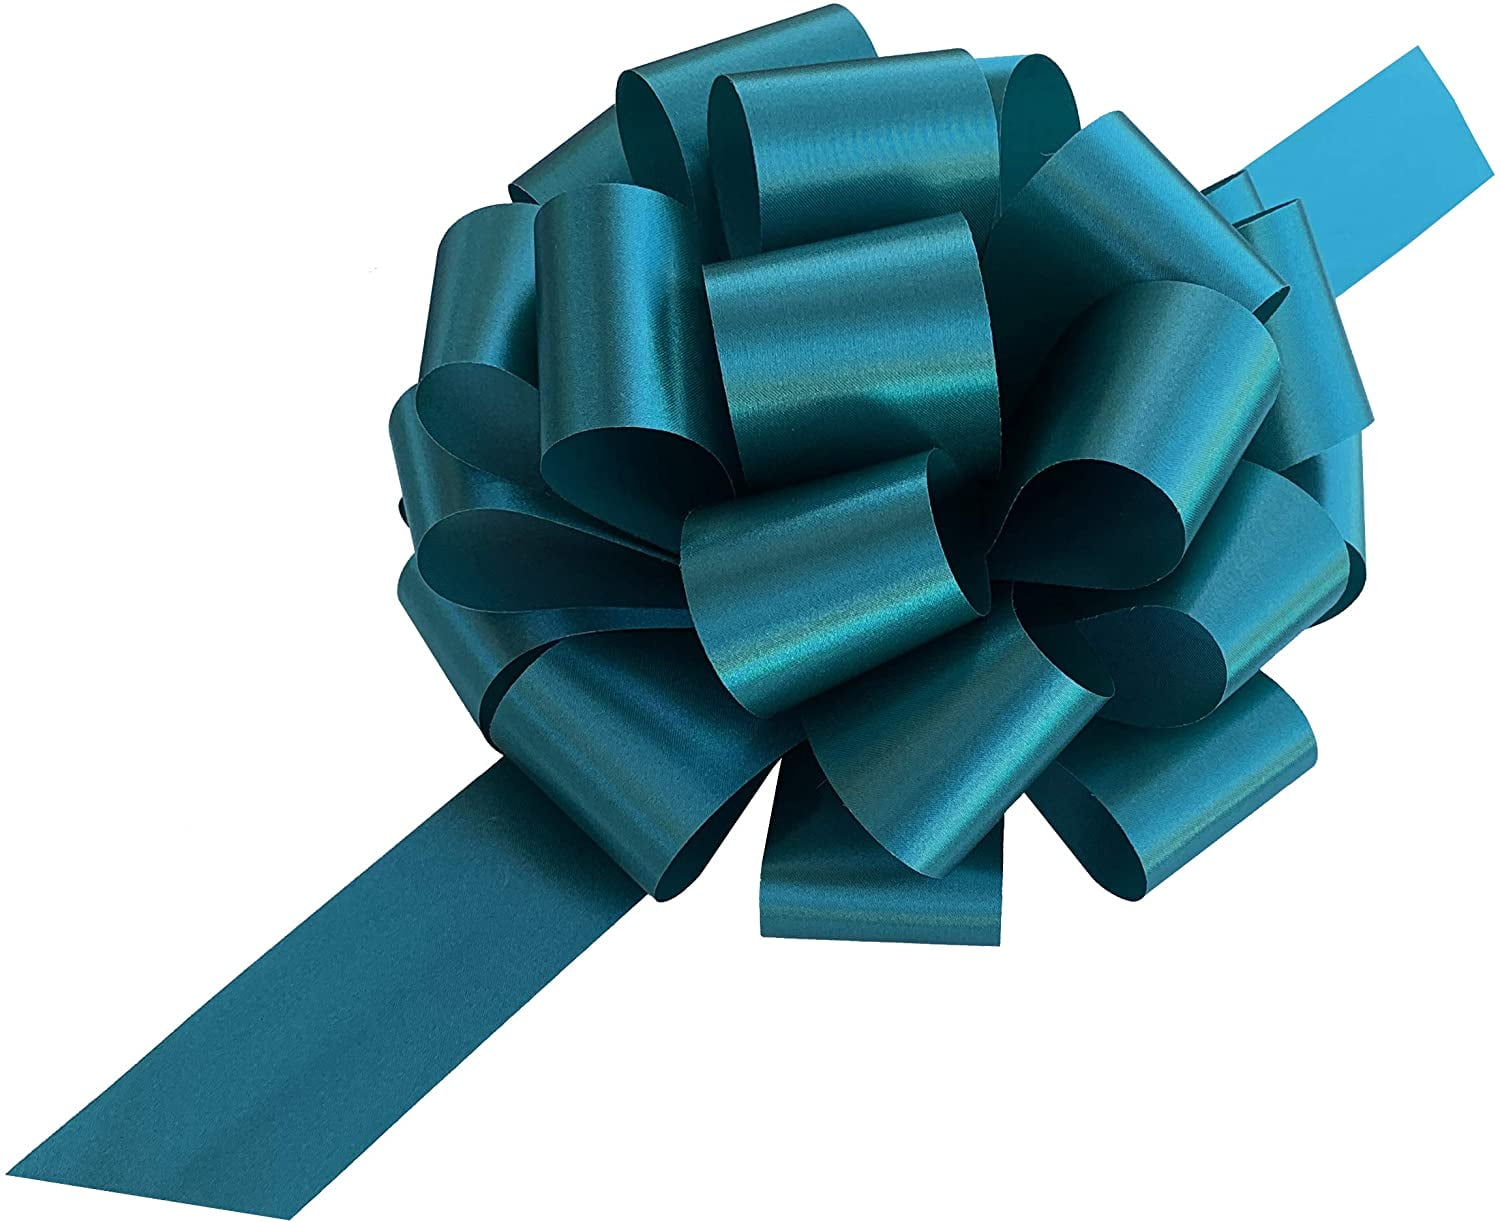 Light Blue Ribbon Pull Bows - 9 inch Wide, Set of 6, Gift Bows, Christmas, Easter